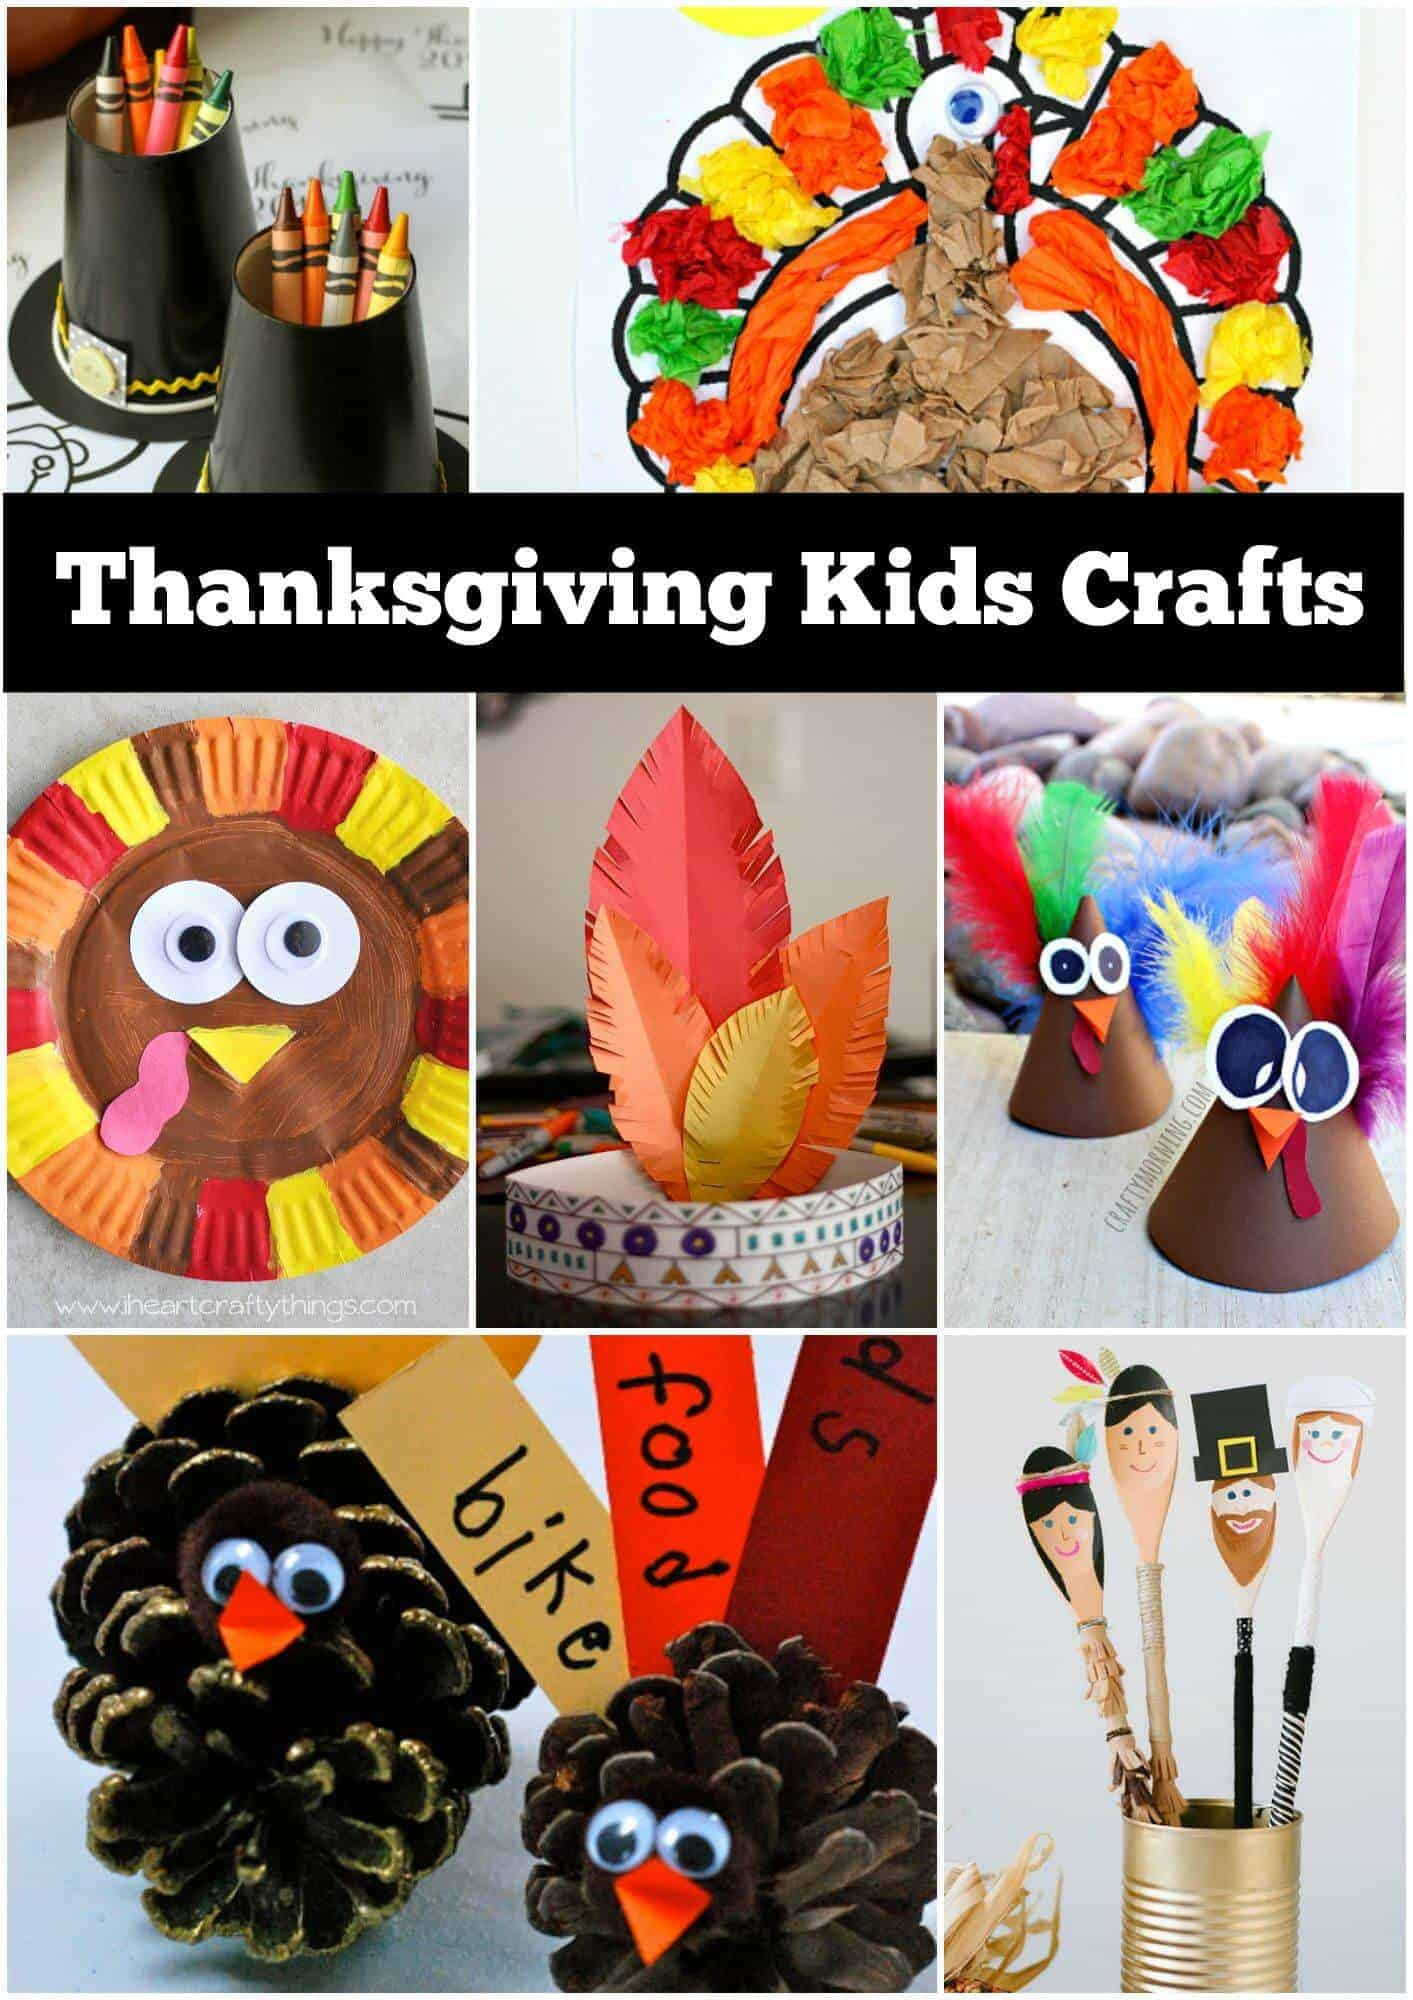 Kids Craft Ideas For Thanksgiving
 12 Thanksgiving Craft Ideas for kids Page 2 of 2